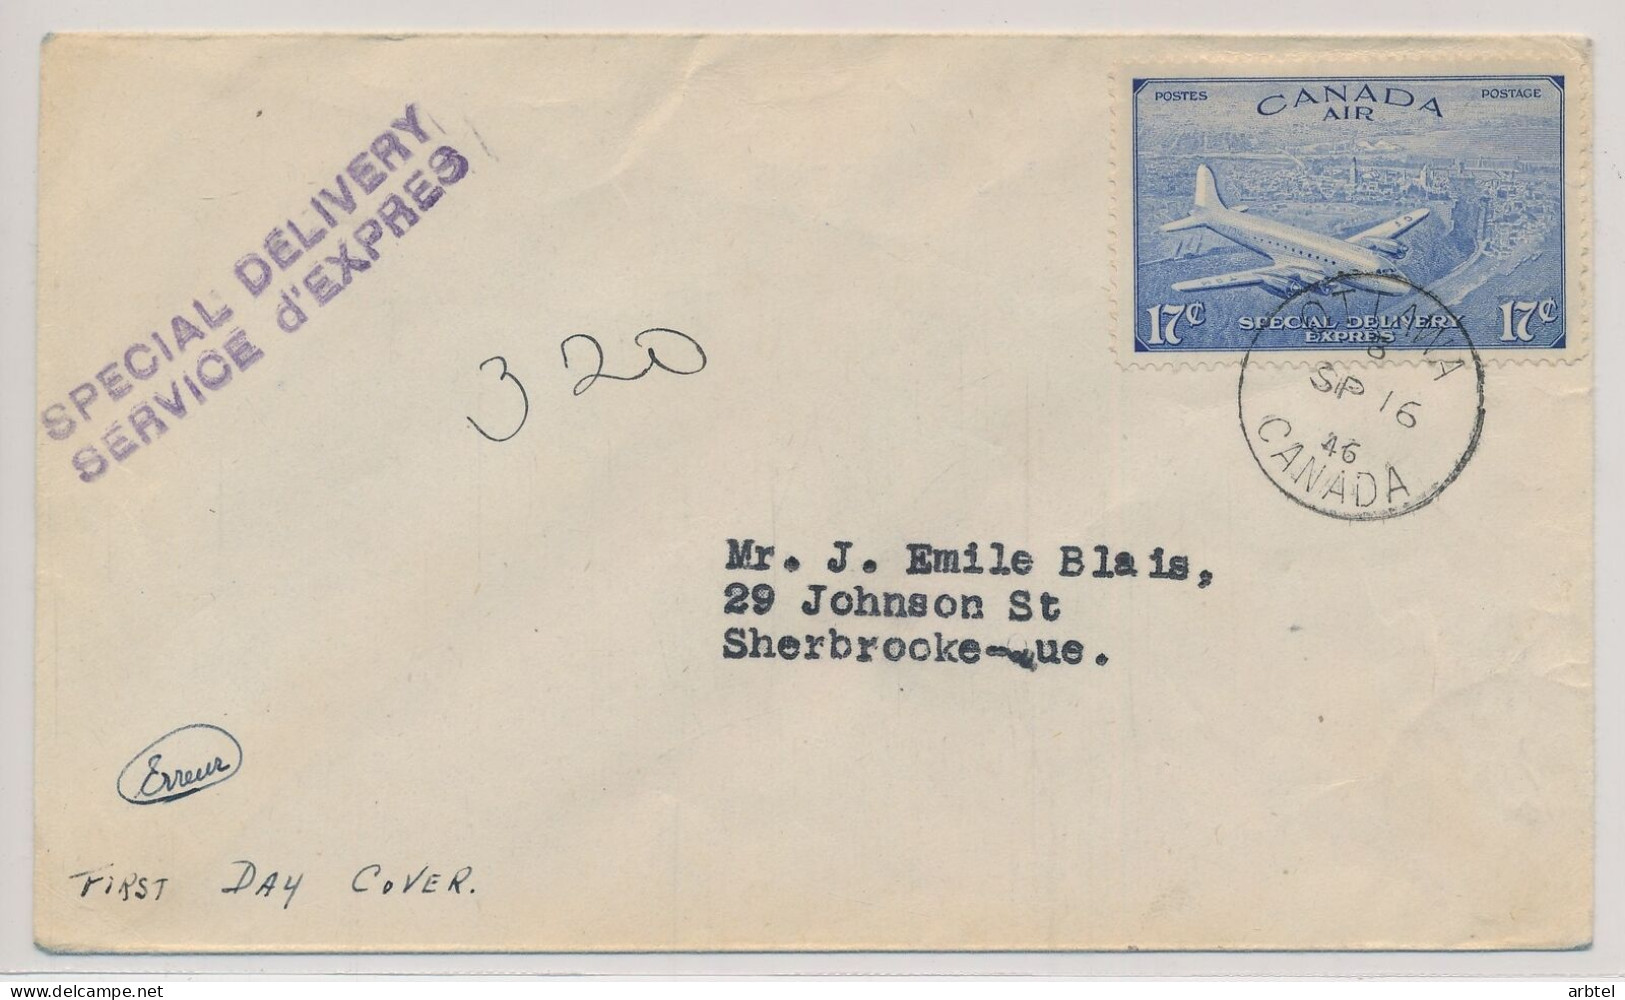 CANADA OTTAWA A SHERBROOKE CC 1946 SPECIAL DELIVERY EXPRES SELLO AVION PLANE - Covers & Documents